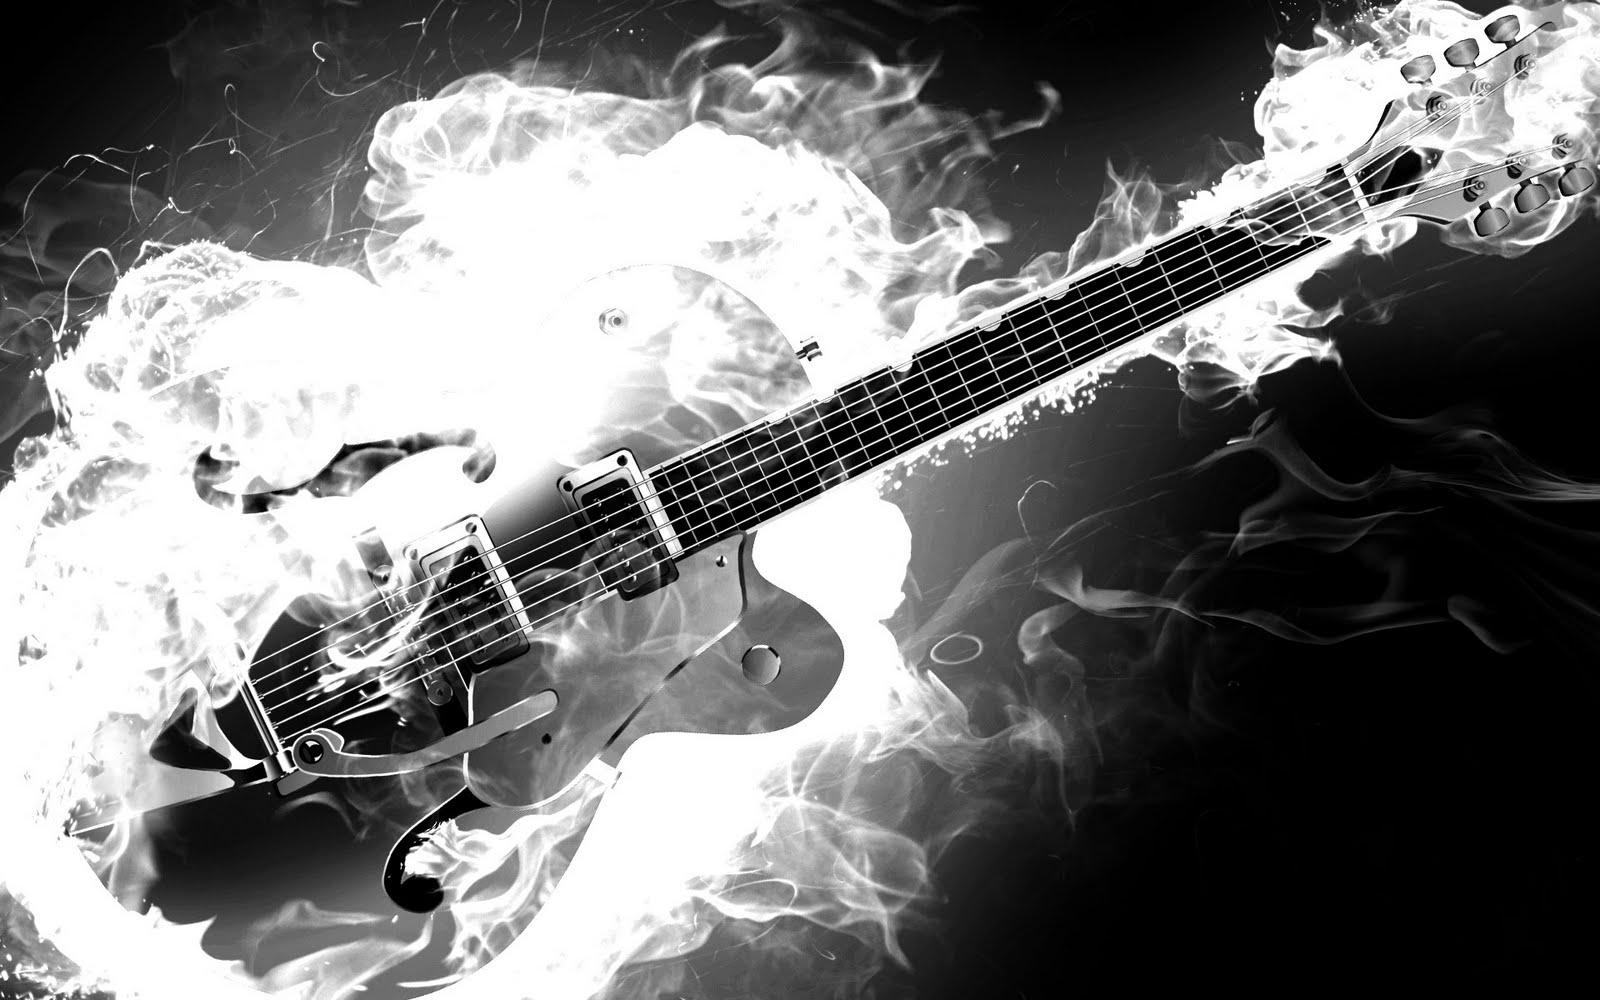 Awesome Bass Guitar Wallpaper Images 22019 Hd Pictures Best | HD ...